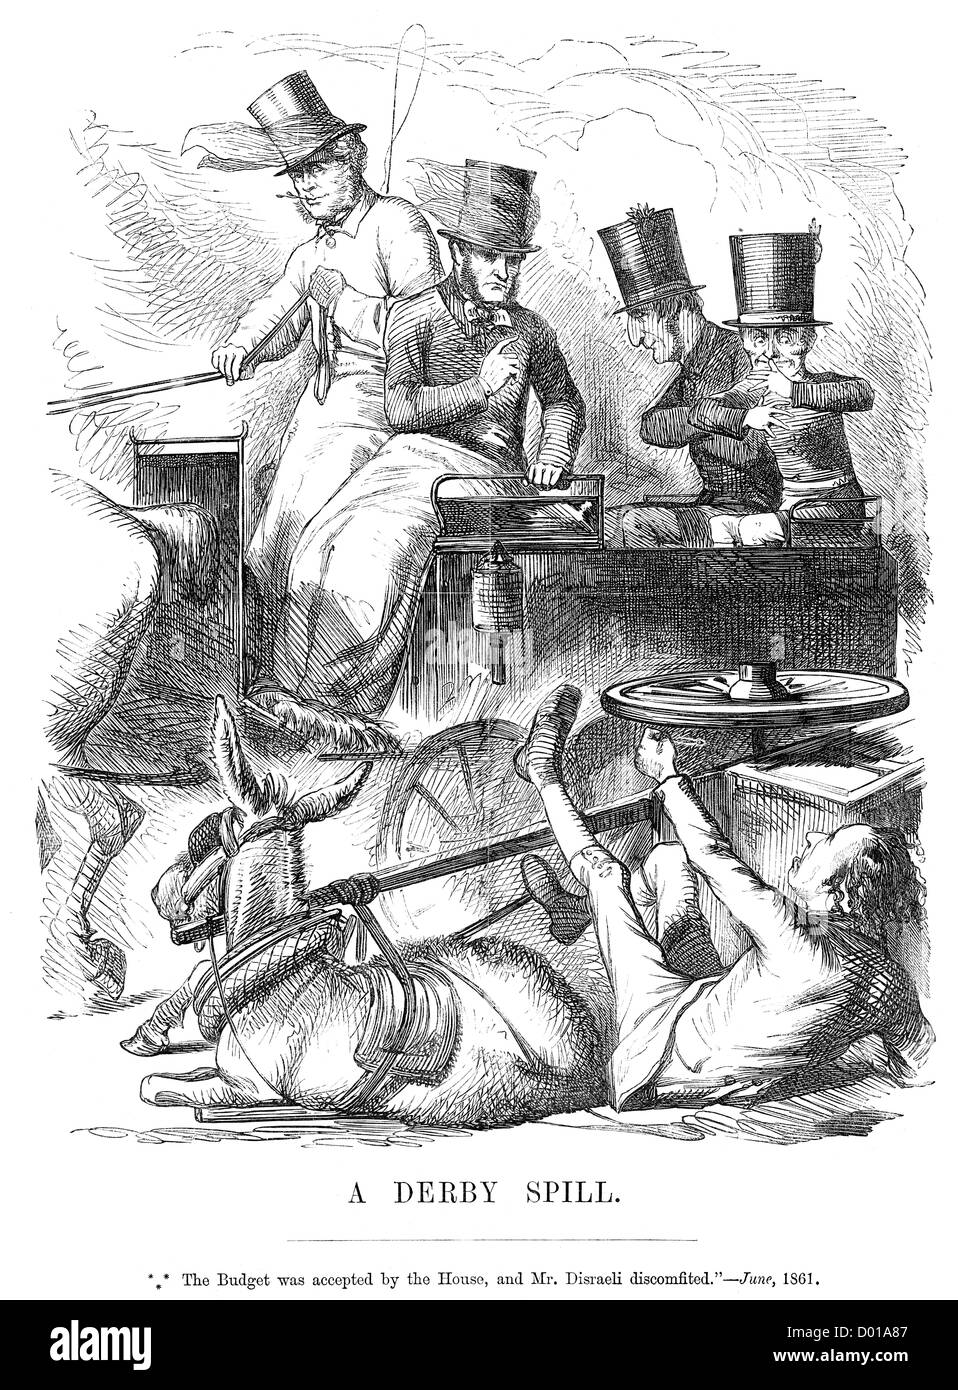 Derby Spill. Political cartoon about Disraeli failing to stop the Budget, June 1861 Stock Photo